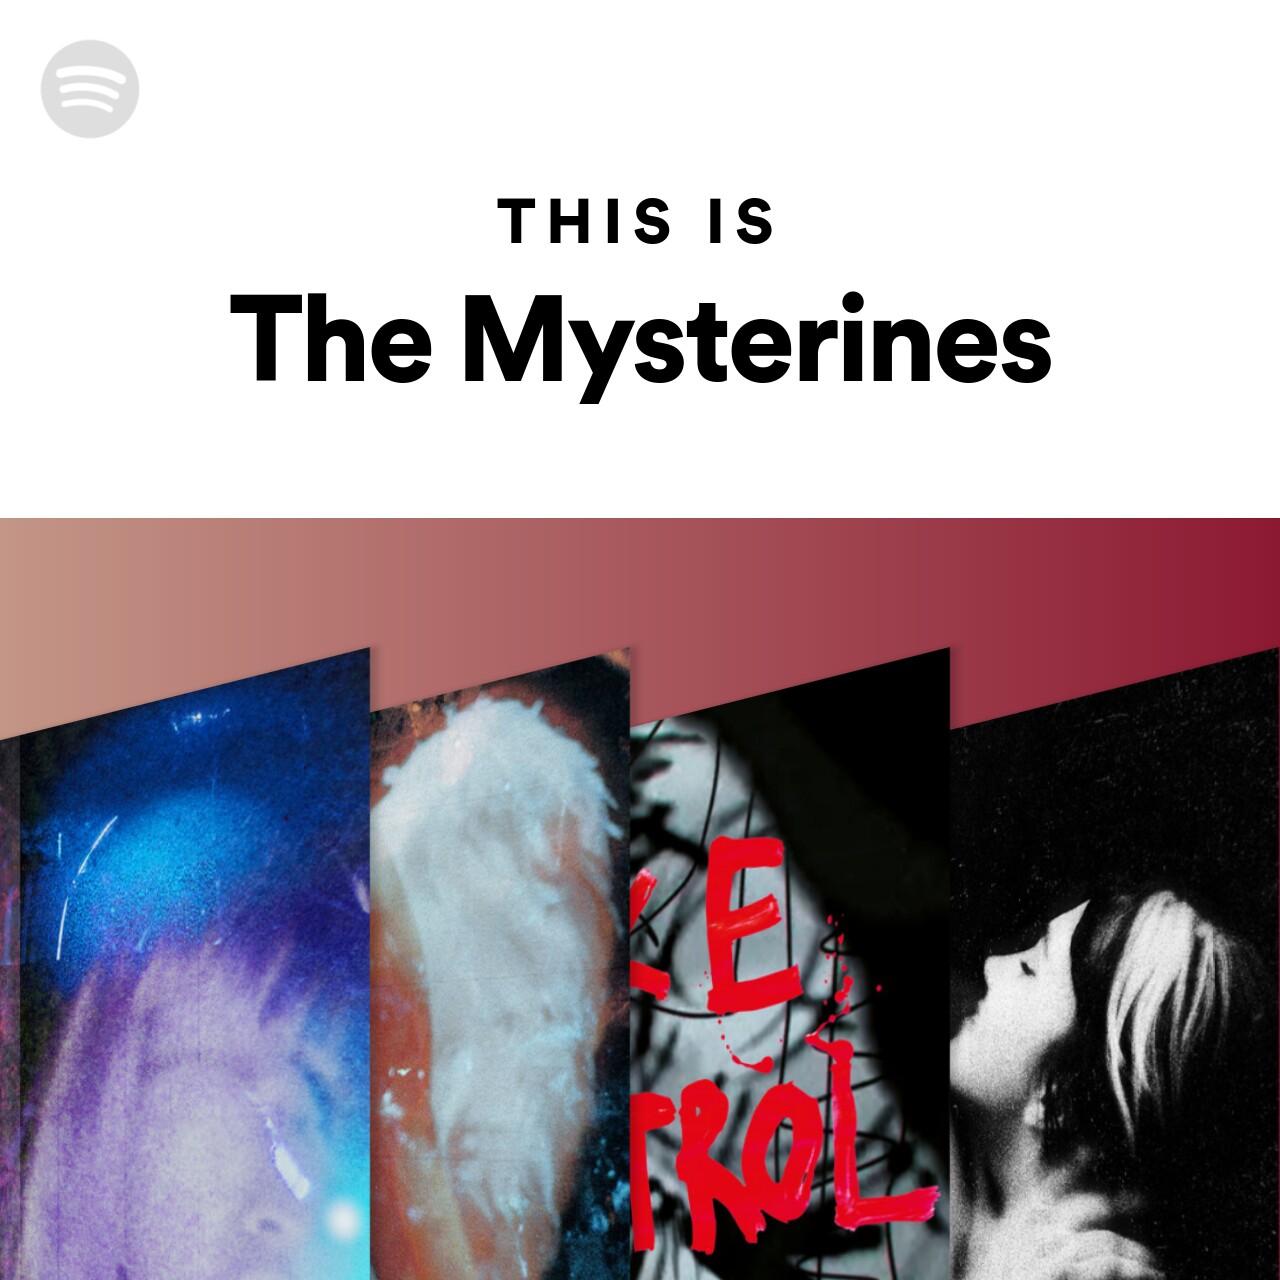 This Is The Mysterines